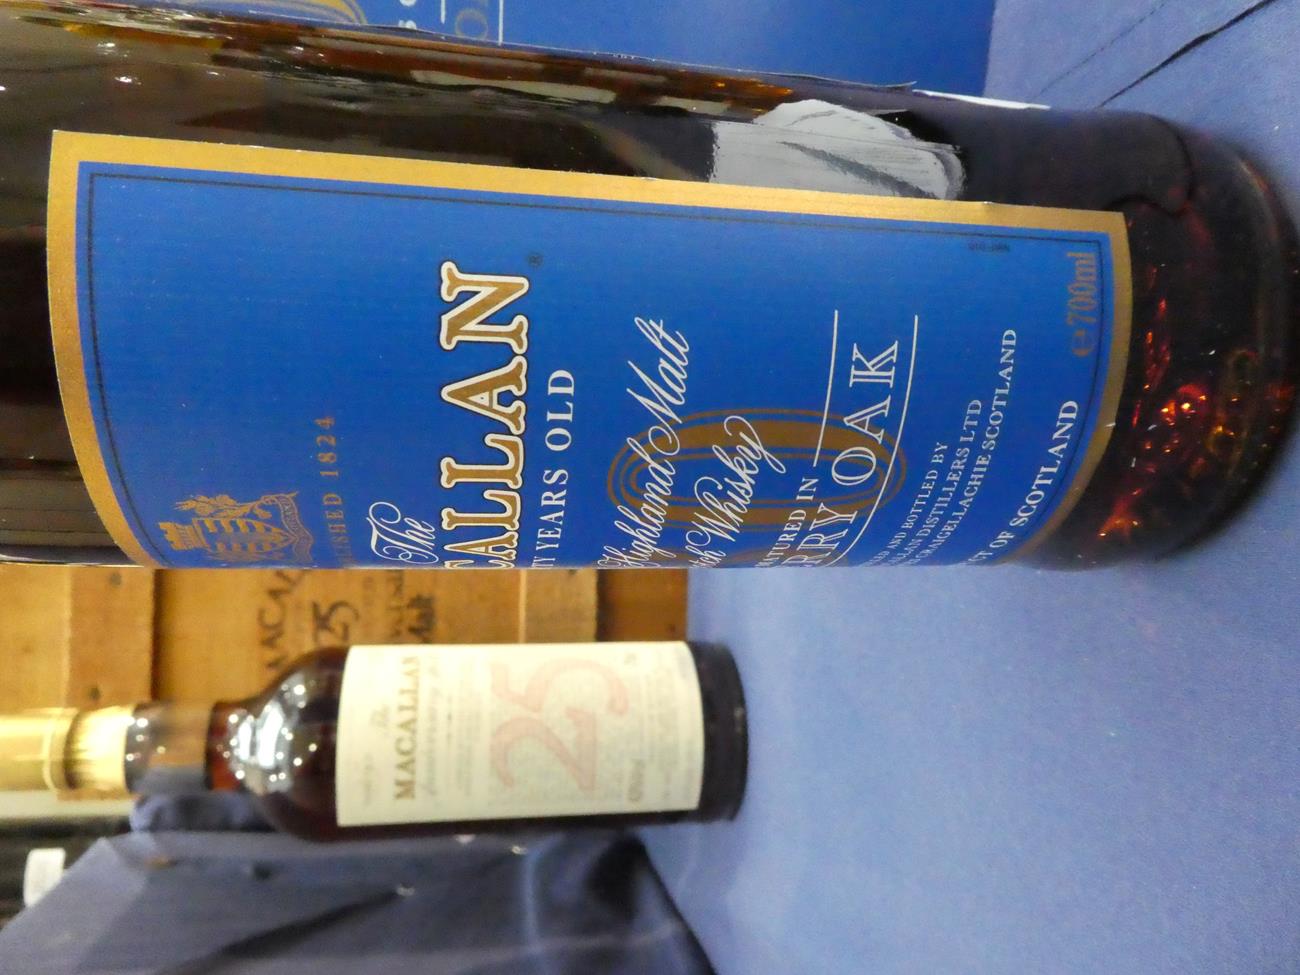 The Macallan 30 Years Old Single Highland Malt Scotch Whisky, 43% vol 700ml, in blue painted - Image 3 of 4